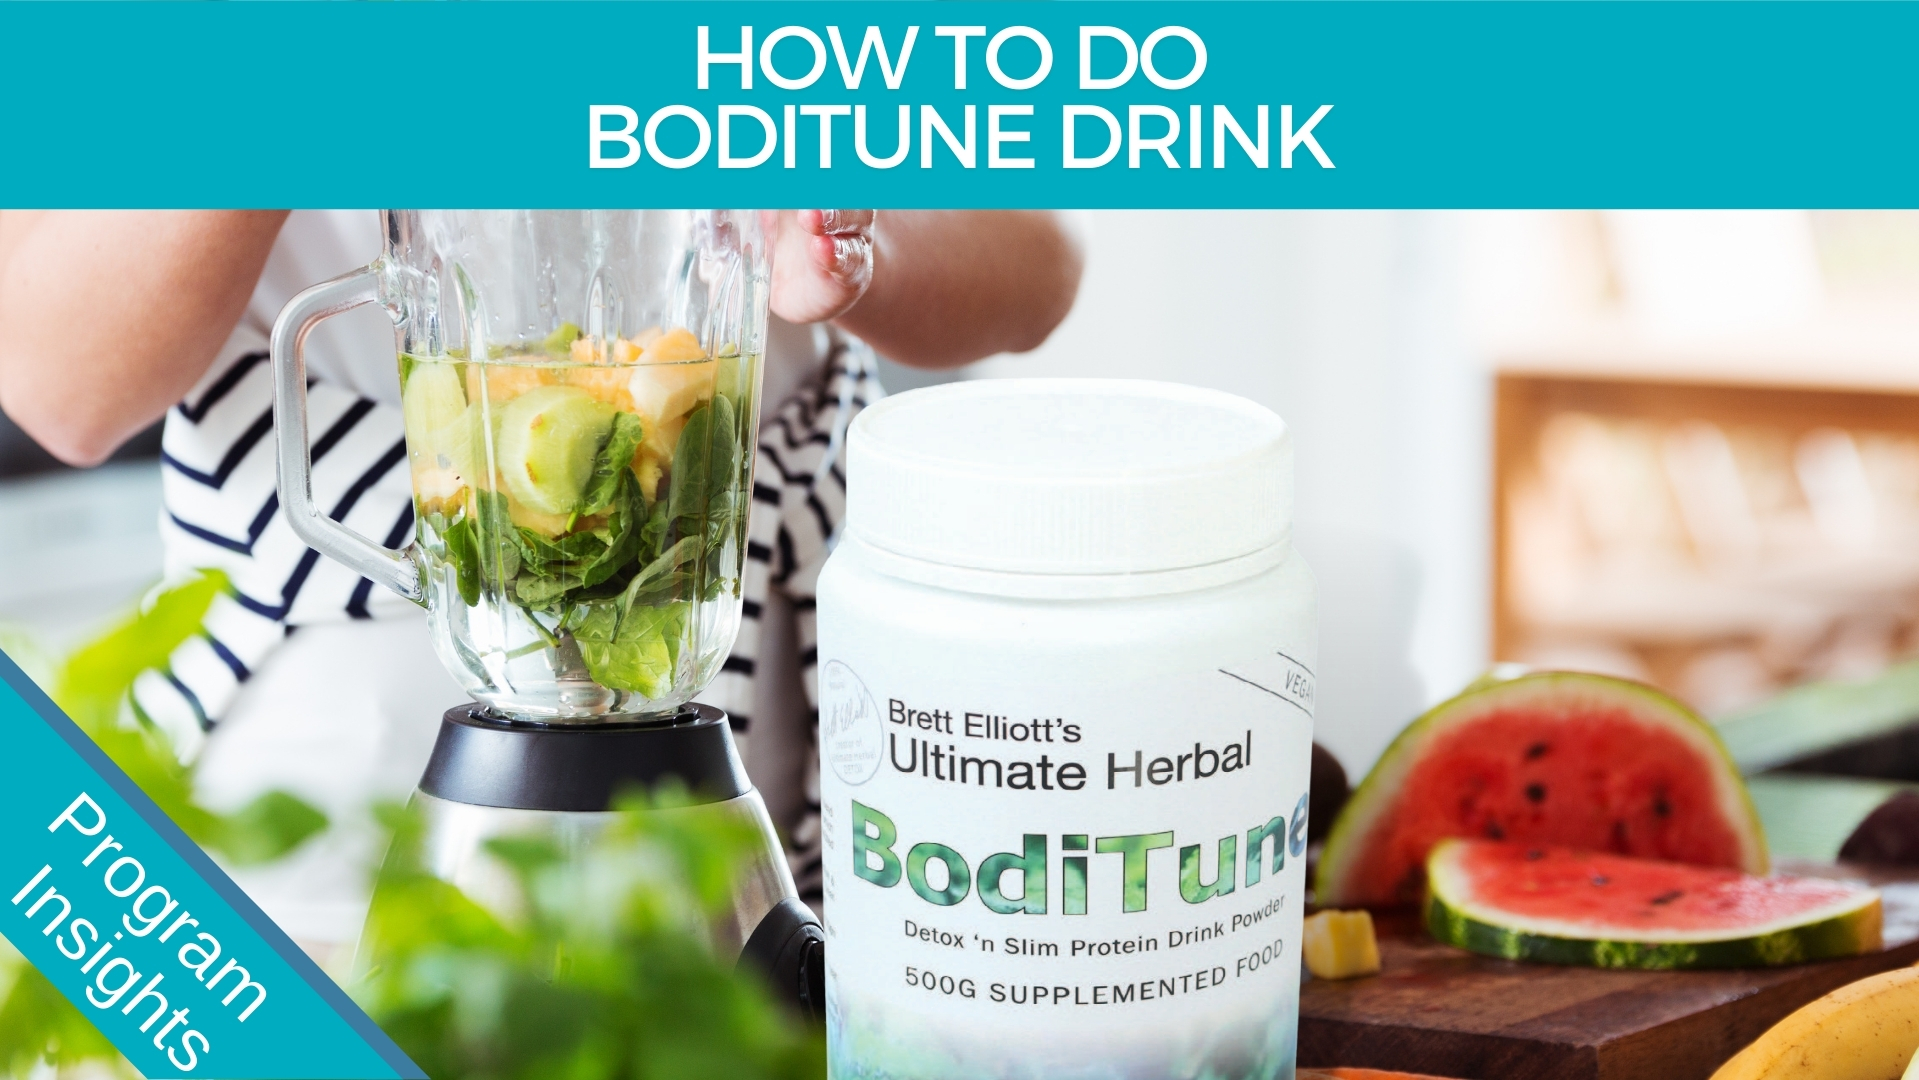 How To Do BodiTune Drink